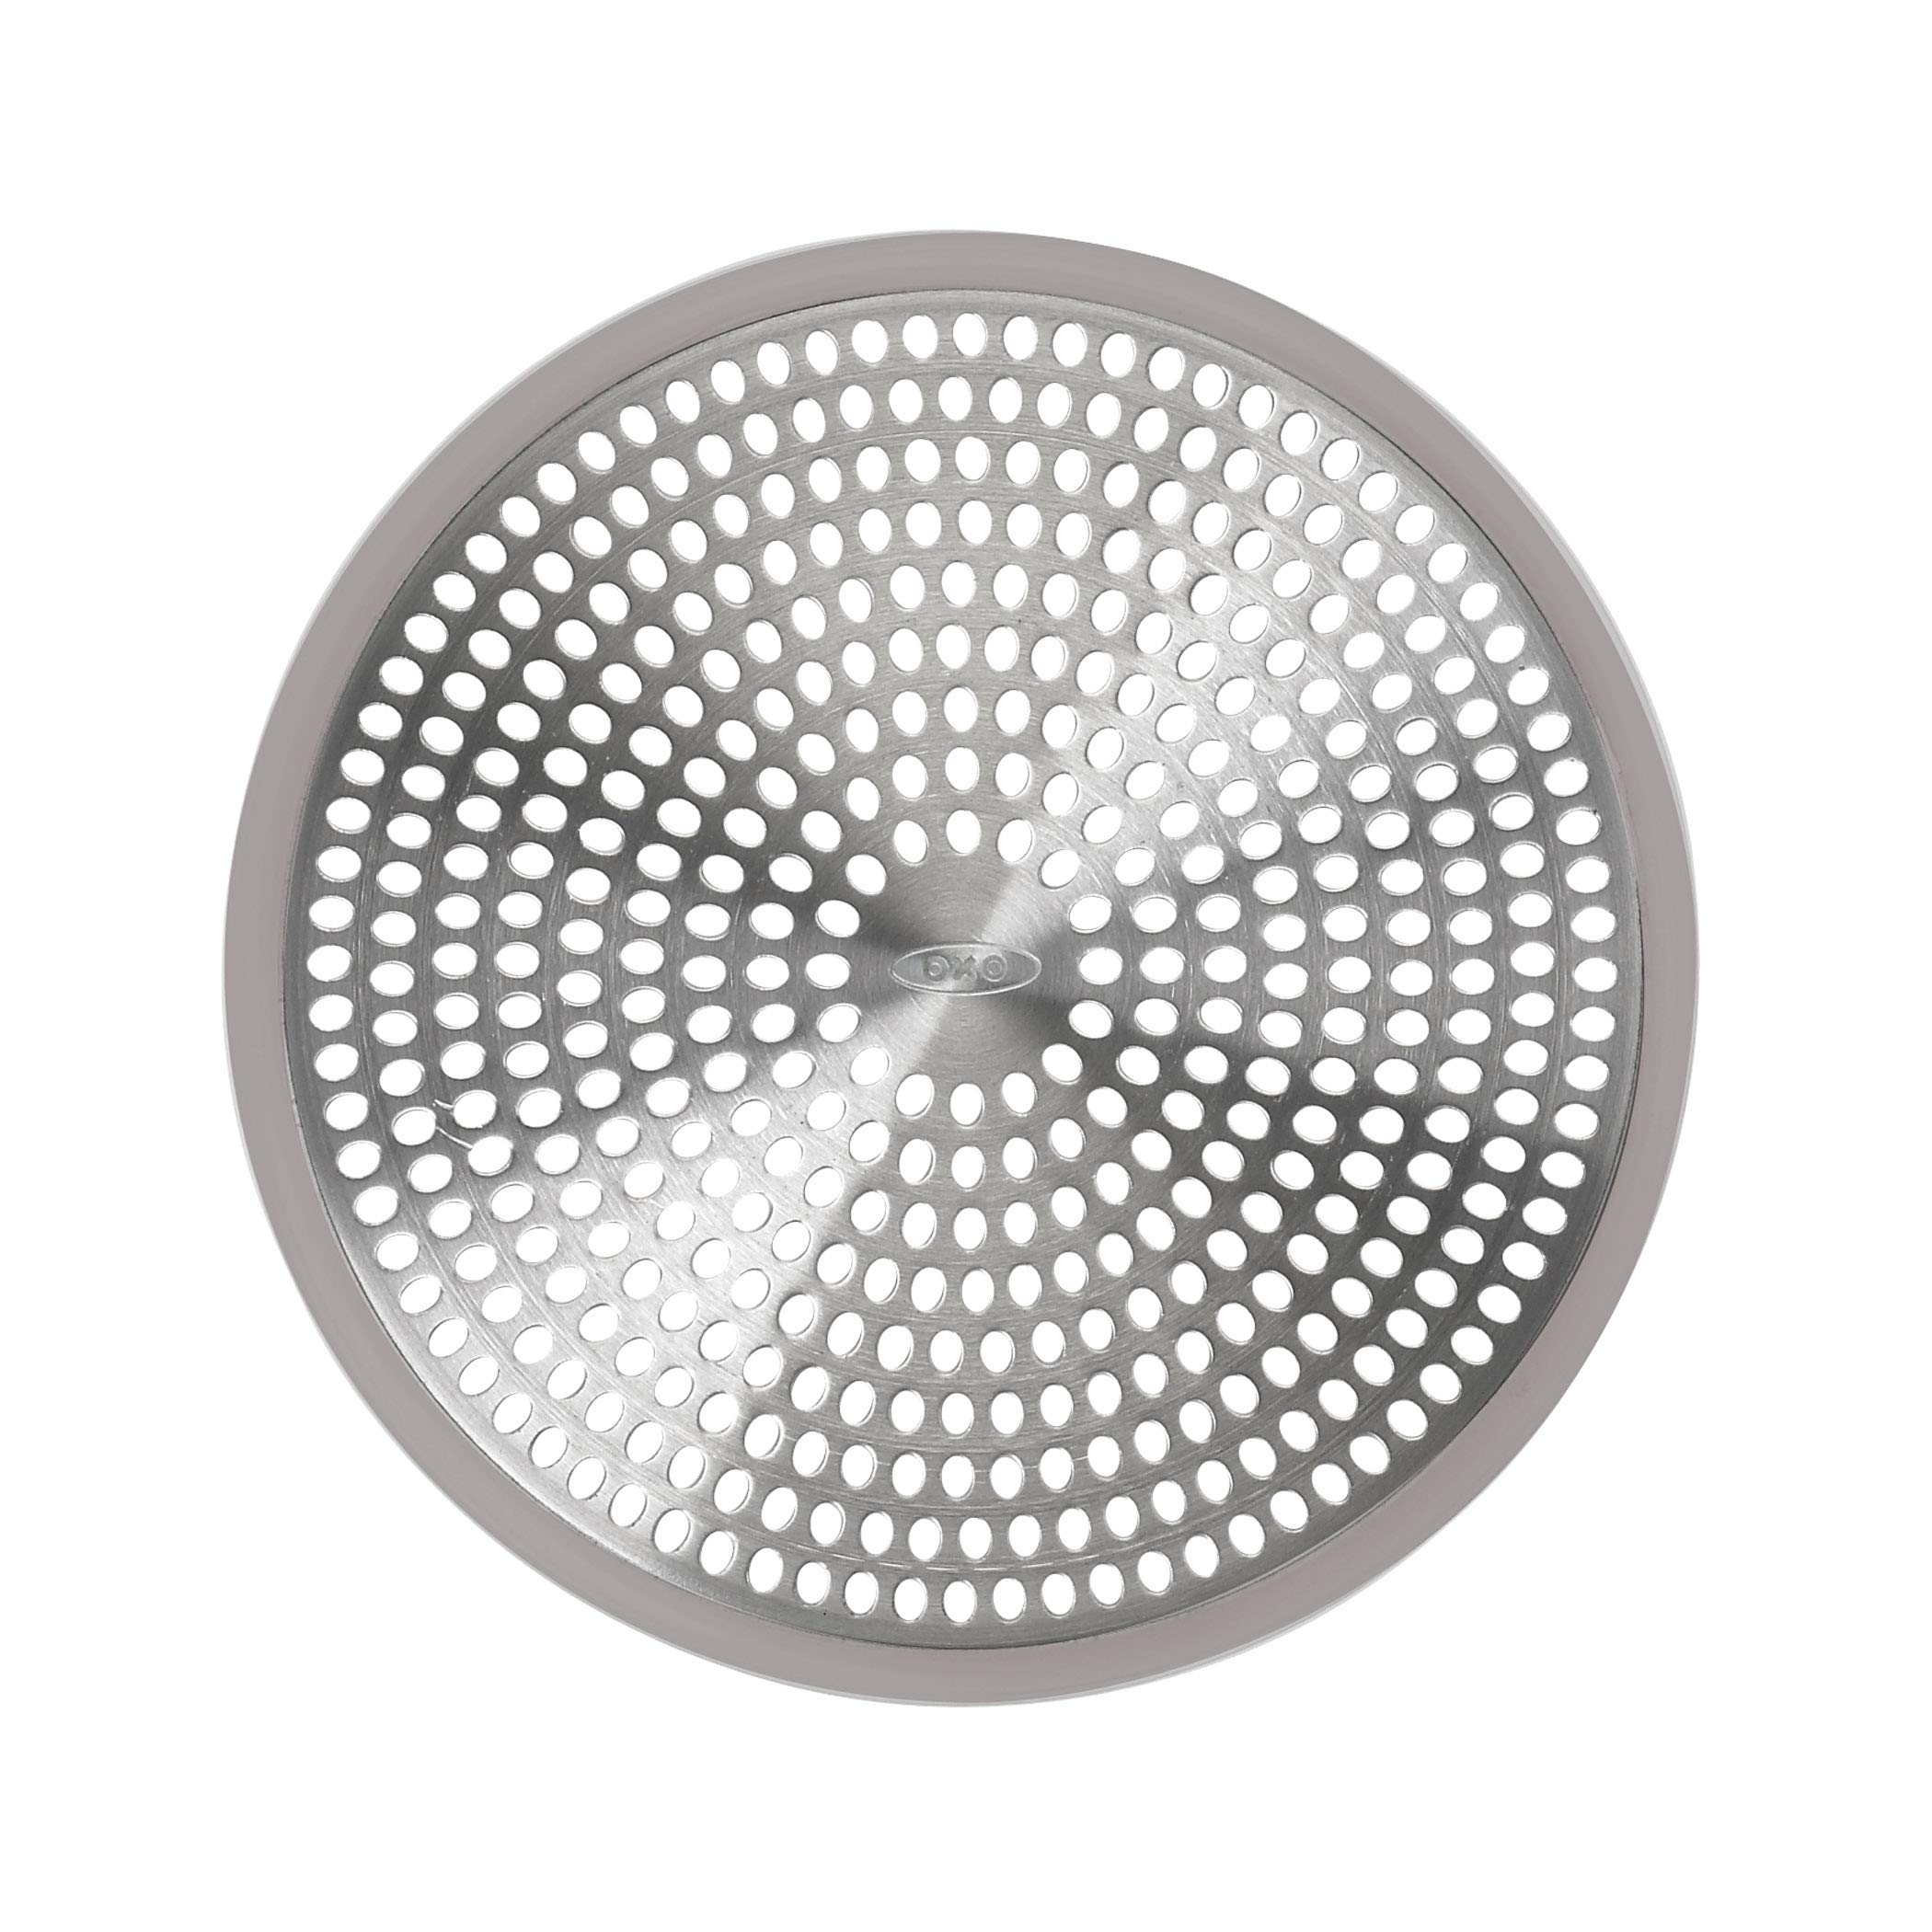 OXO Good Grips 2-in-1 Sink Strainer Stopper & Good Grips Shower Stall Drain Protector, Stainless